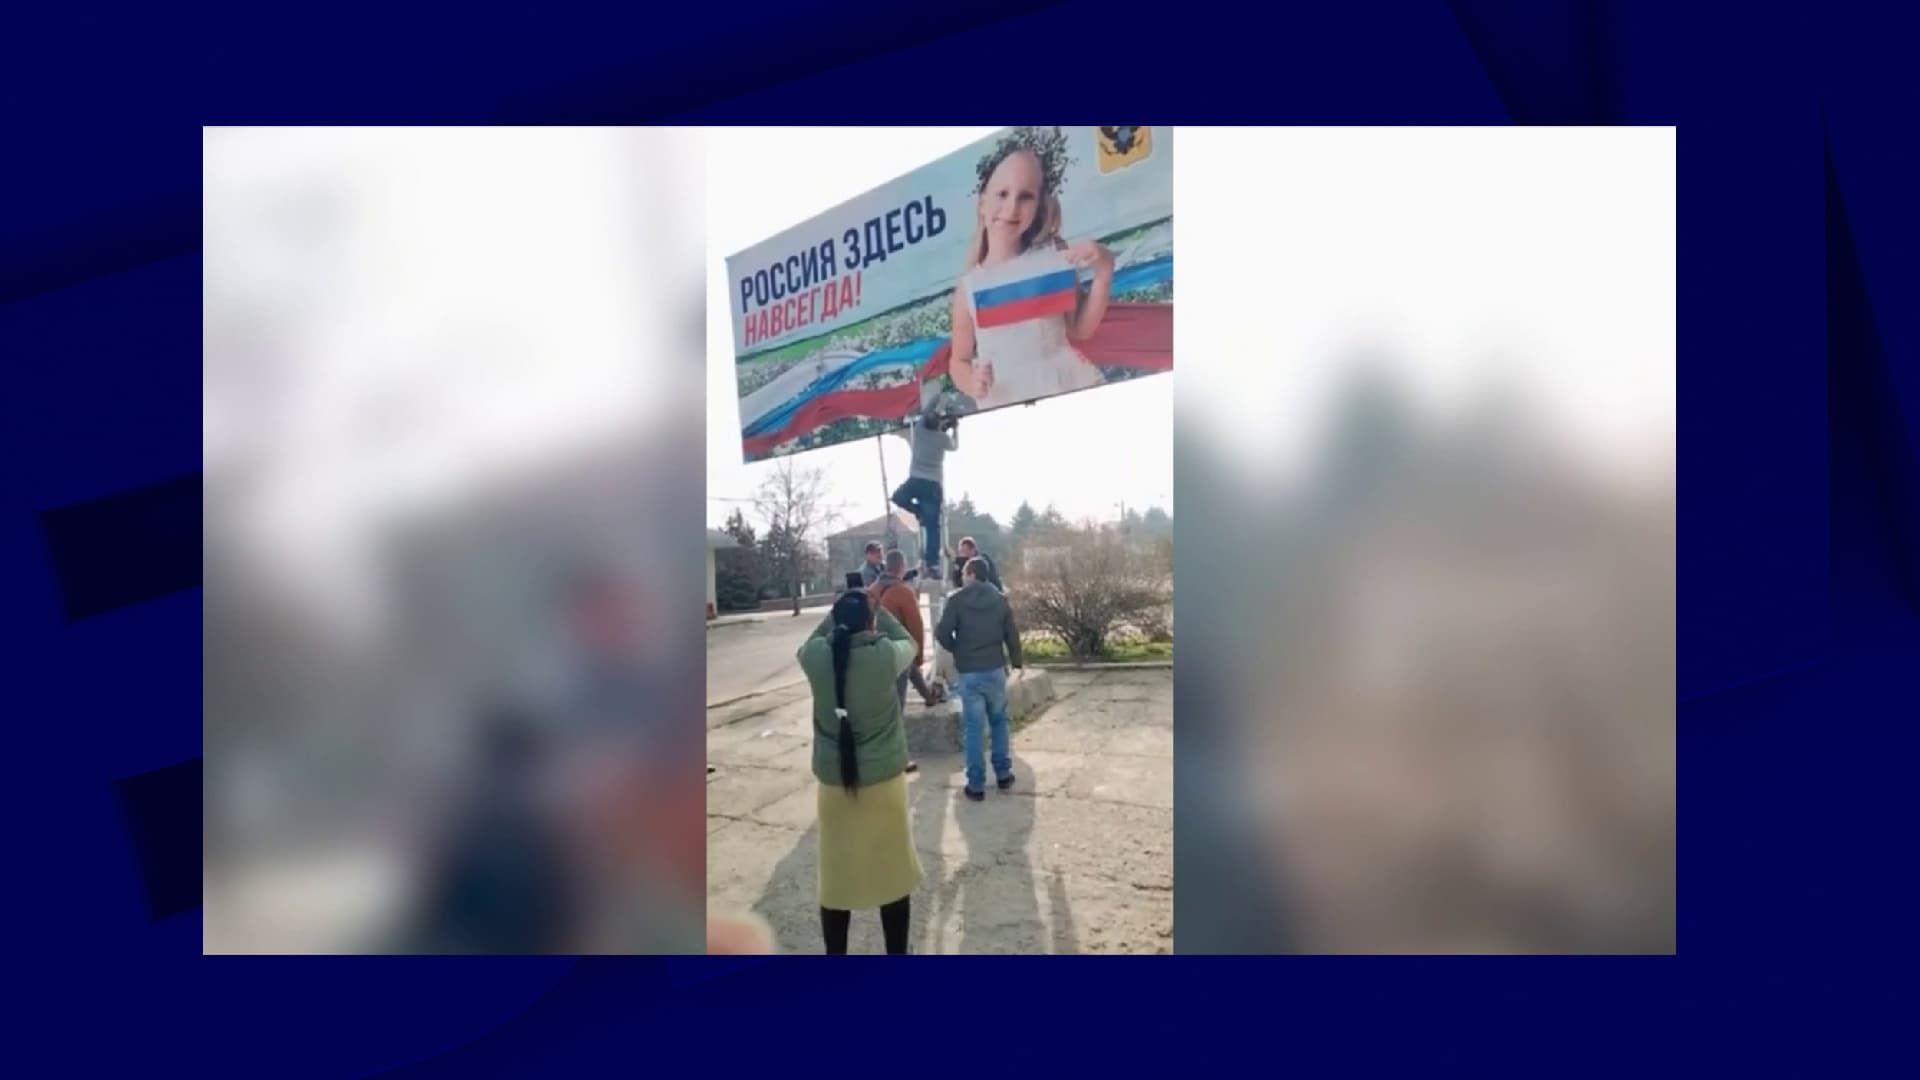 LIVE – Ukrainian takeover of Kherson: Large ‘Russia is here forever’ poster torn down